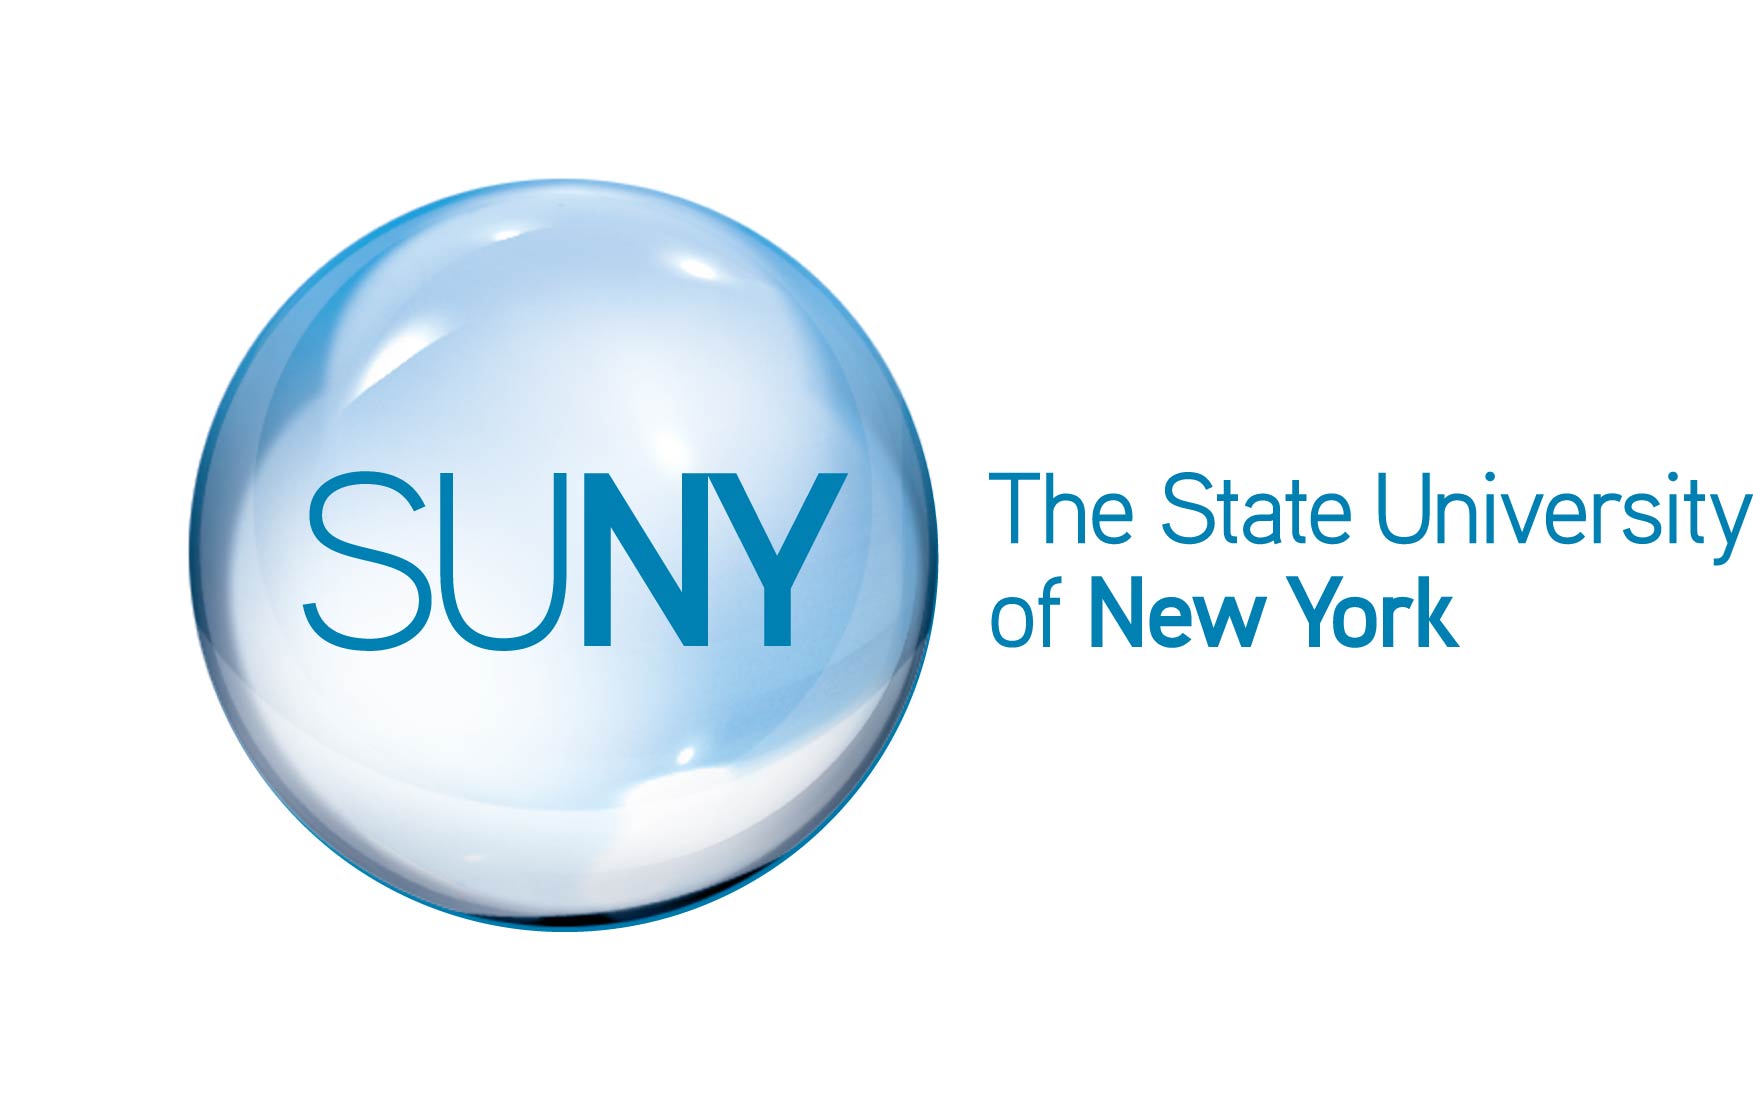 SUNY LOGO - THE STATE UNIVERSITY OF NEW YORK TEXT